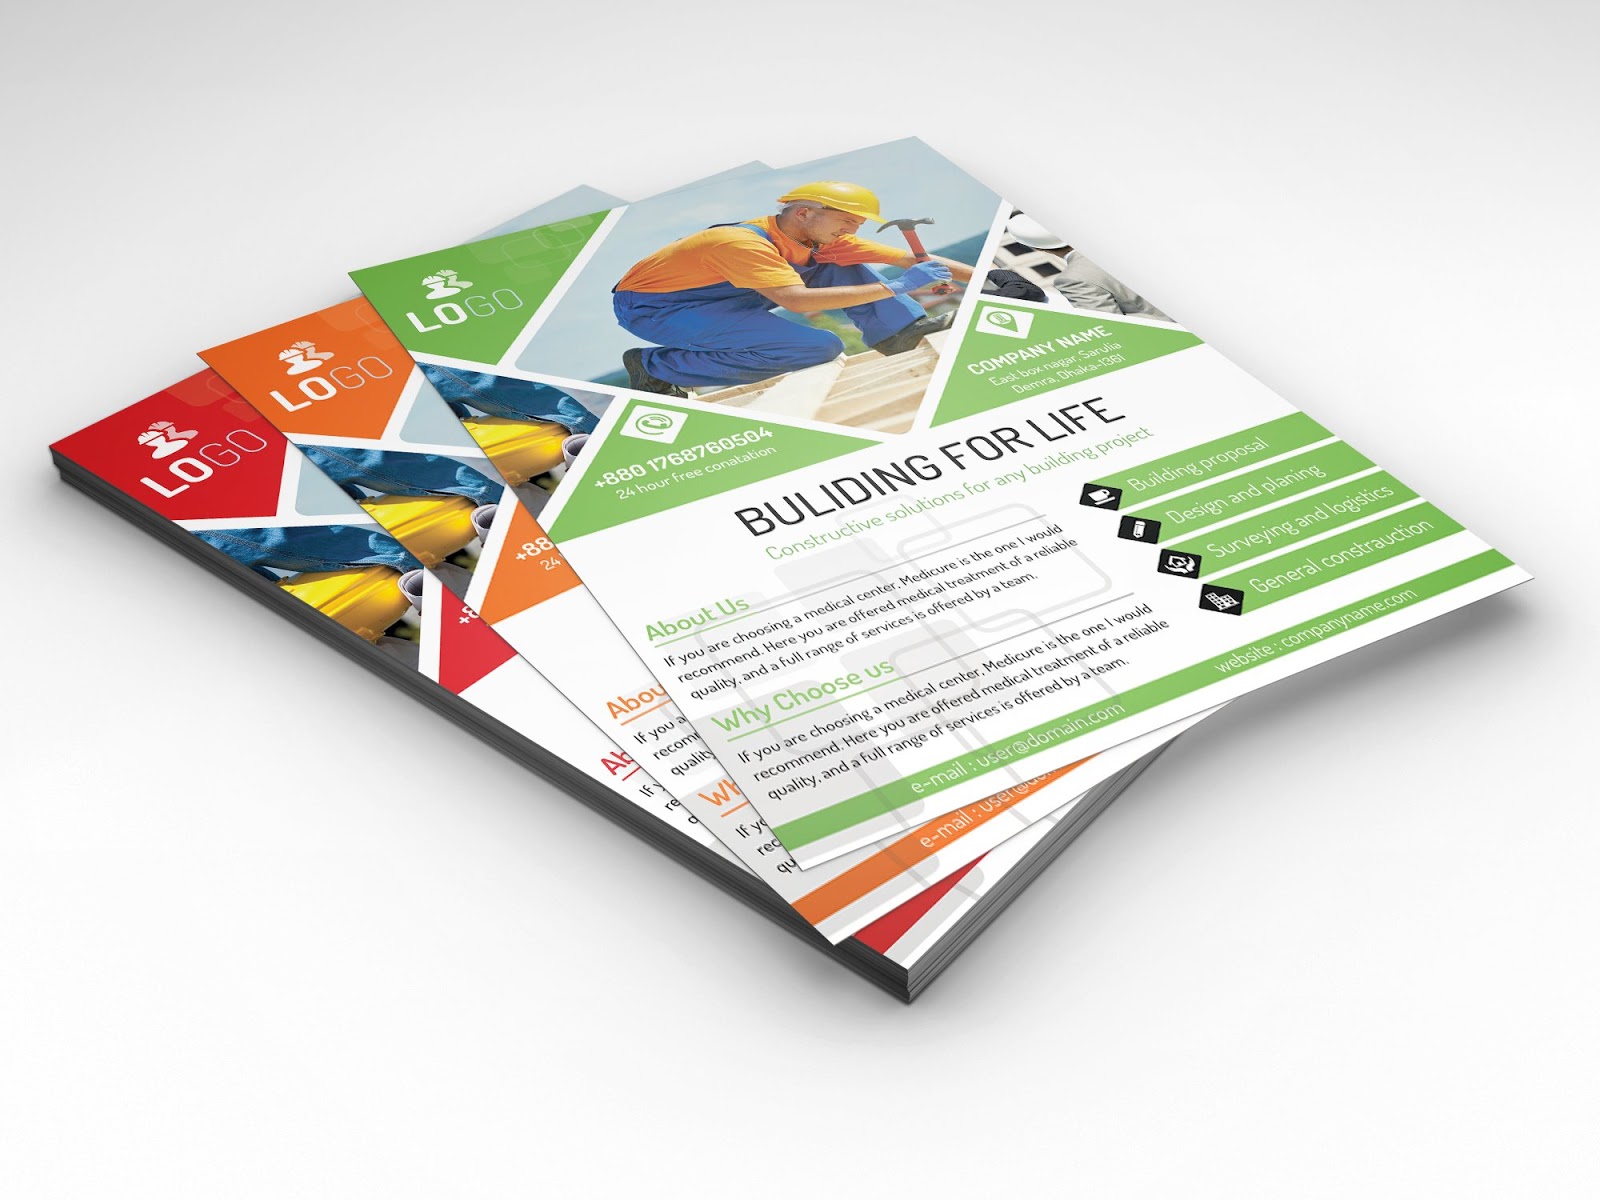 Download 10 High Quality Free Photoshop PSD A4 Flyer/Poster Mockups ...